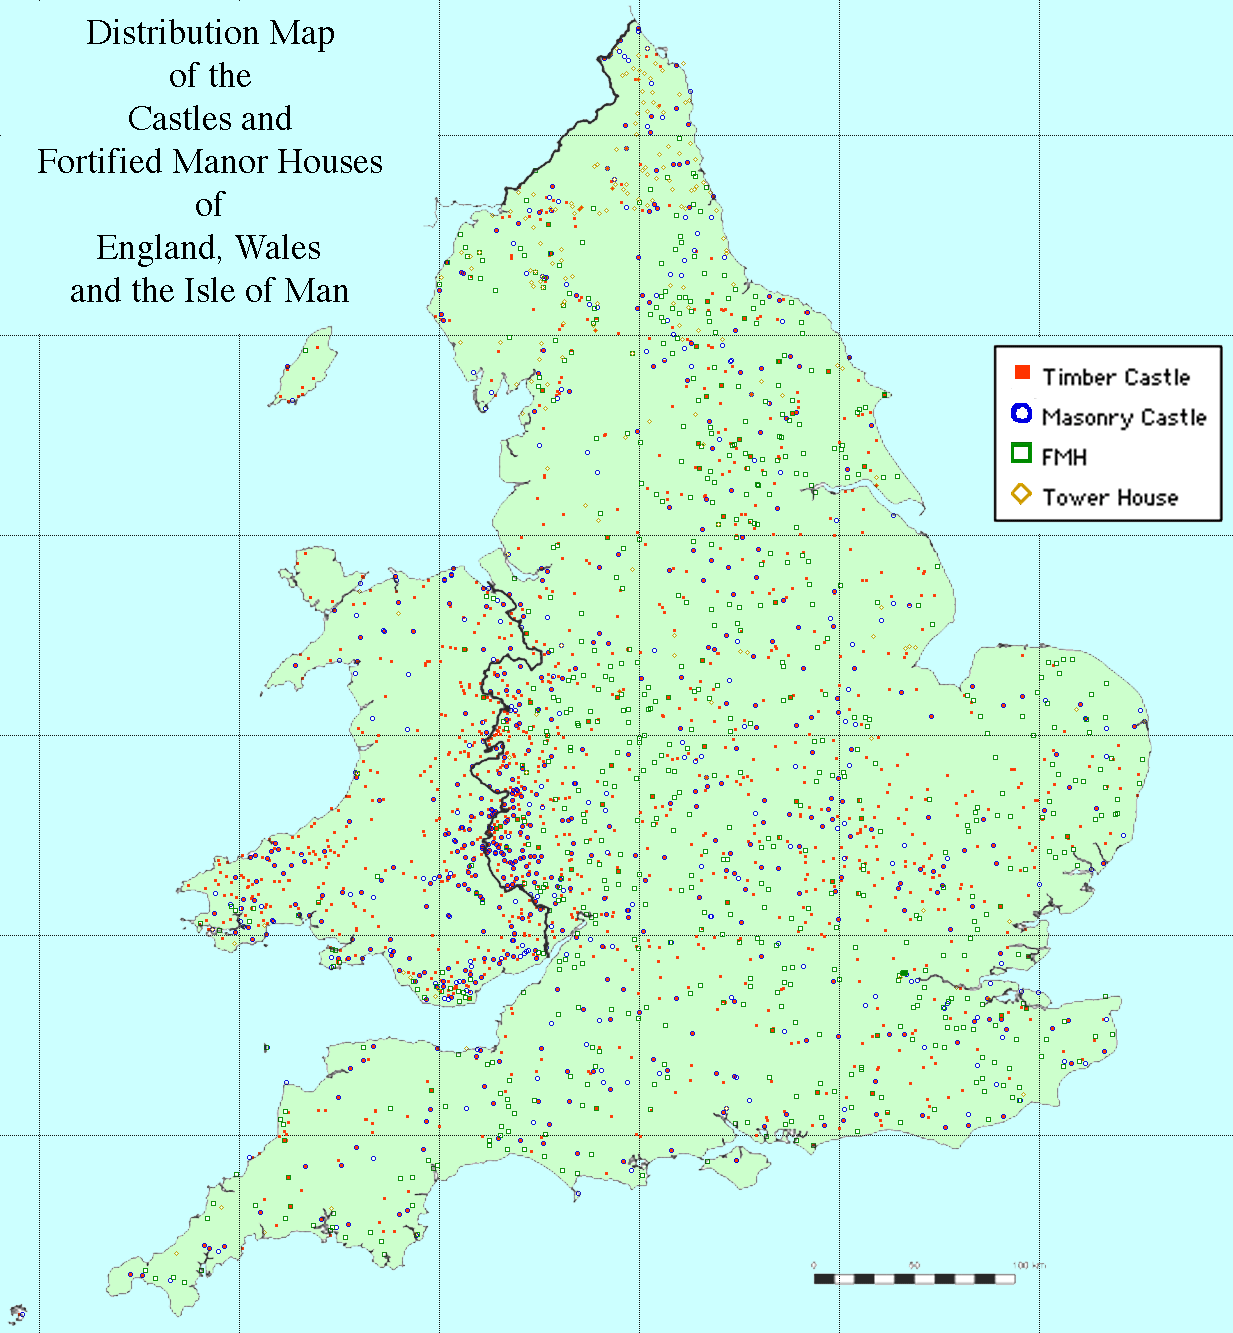 Distribution map of castles and fortified houses